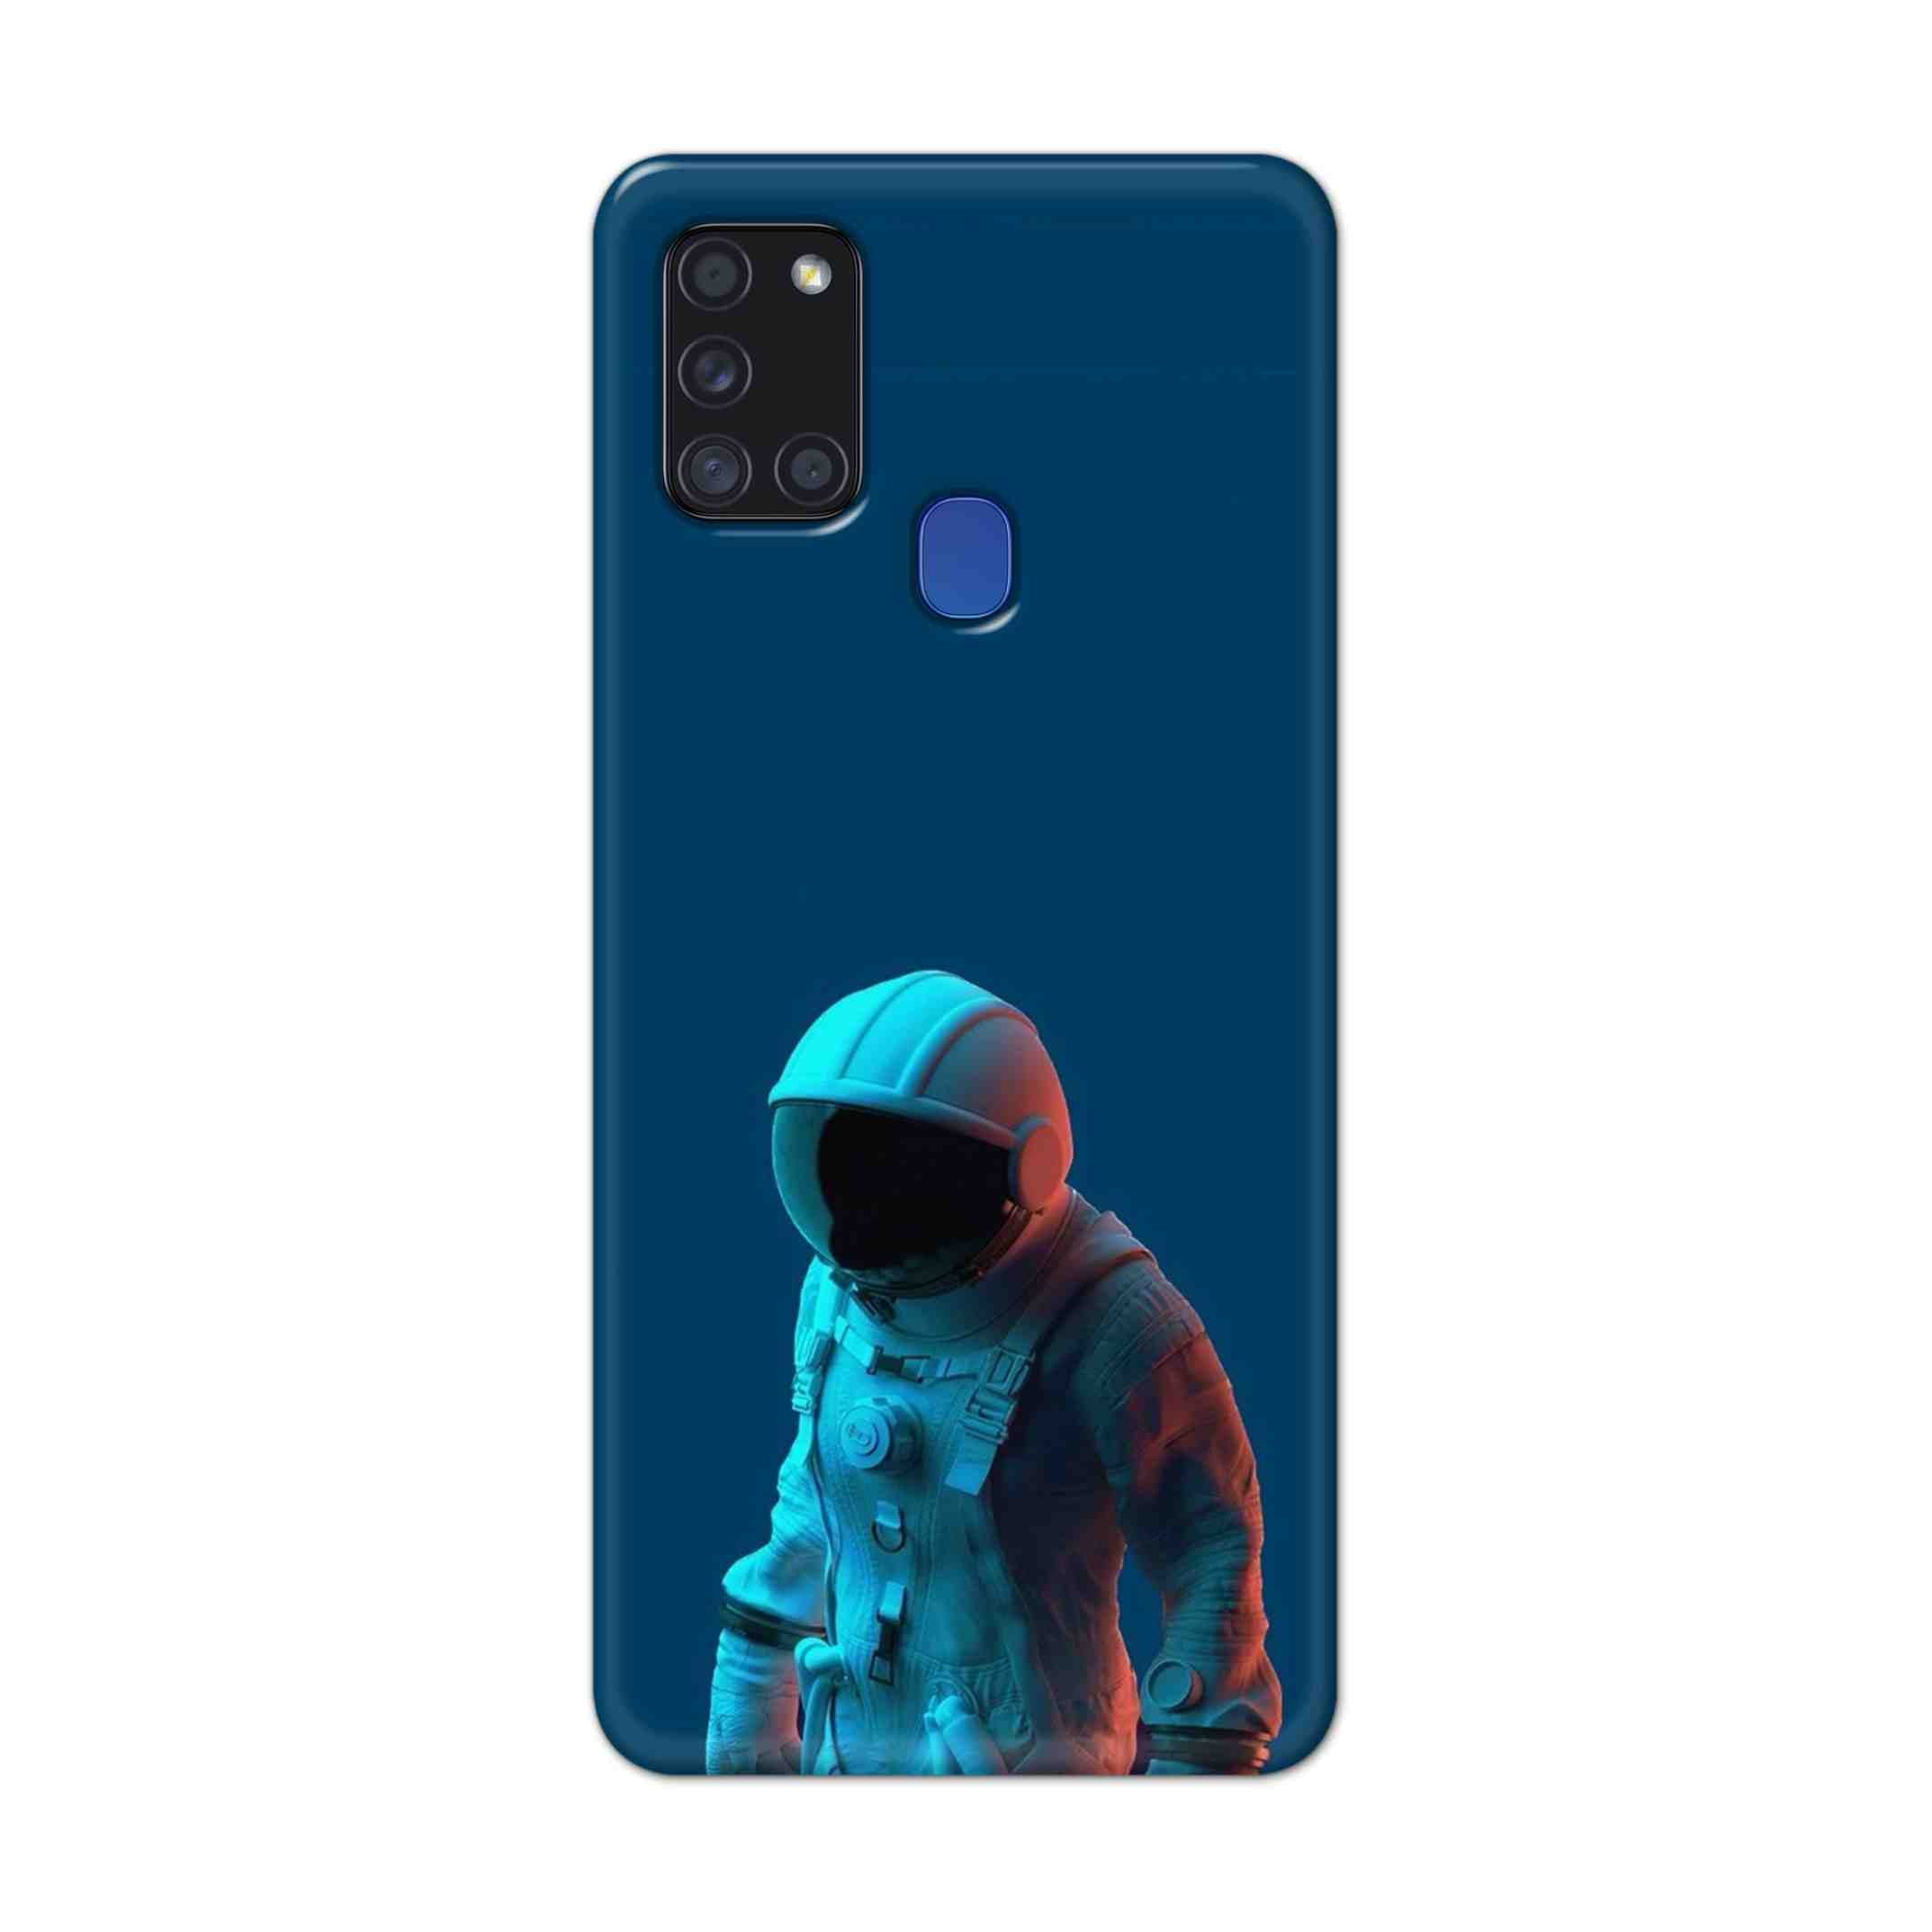 Buy Blue Astronaut Hard Back Mobile Phone Case Cover For Samsung Galaxy A21s Online